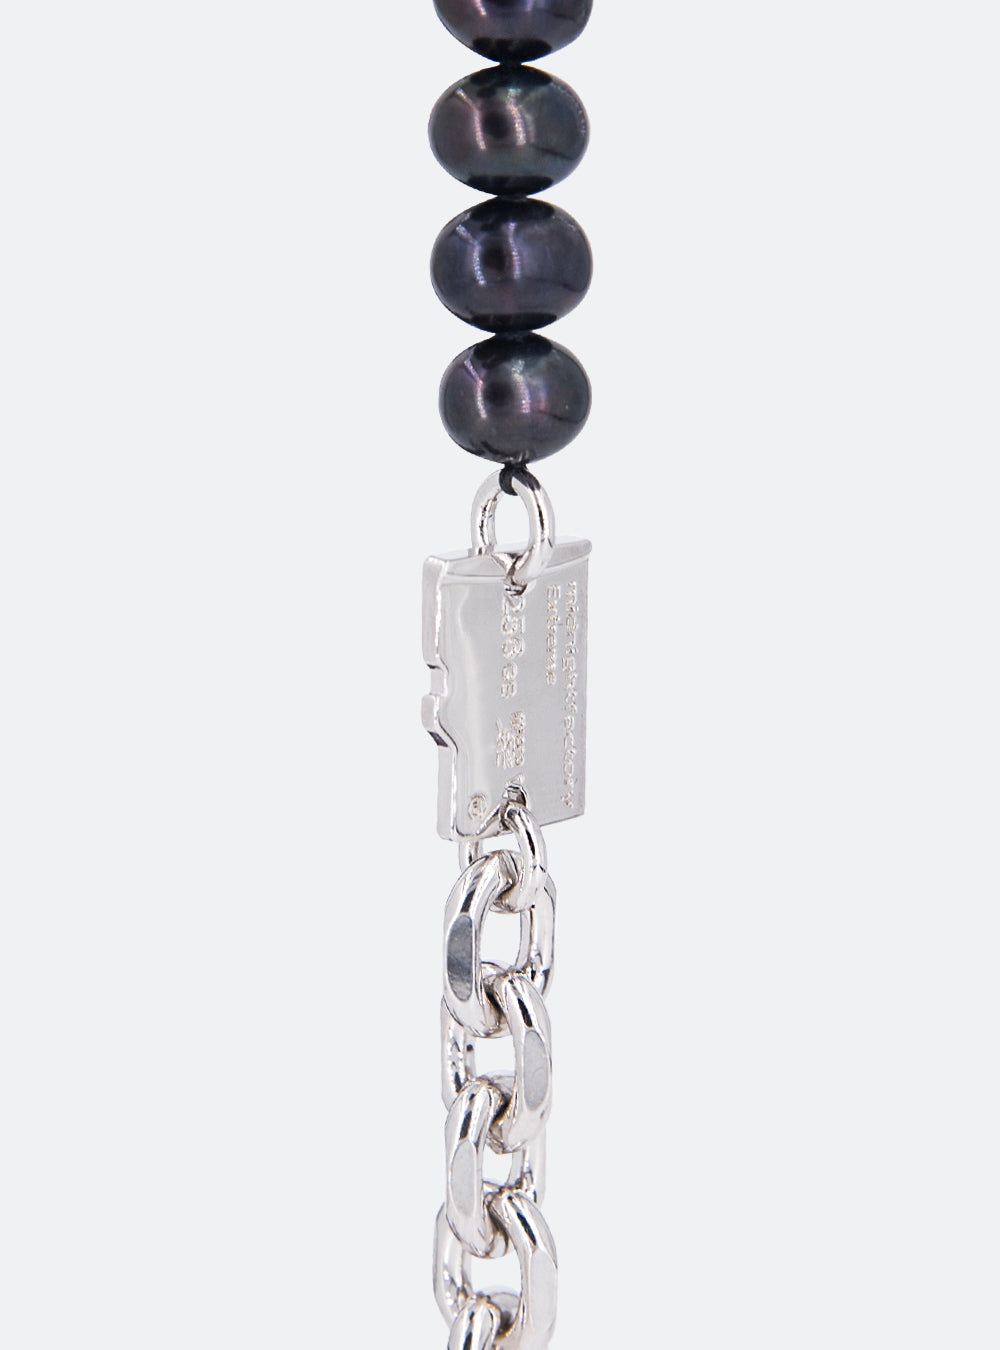 A MIDNIGHTFACTORY Micro-SD black freshwater pearls necklace with adjustable length [Pre-order].